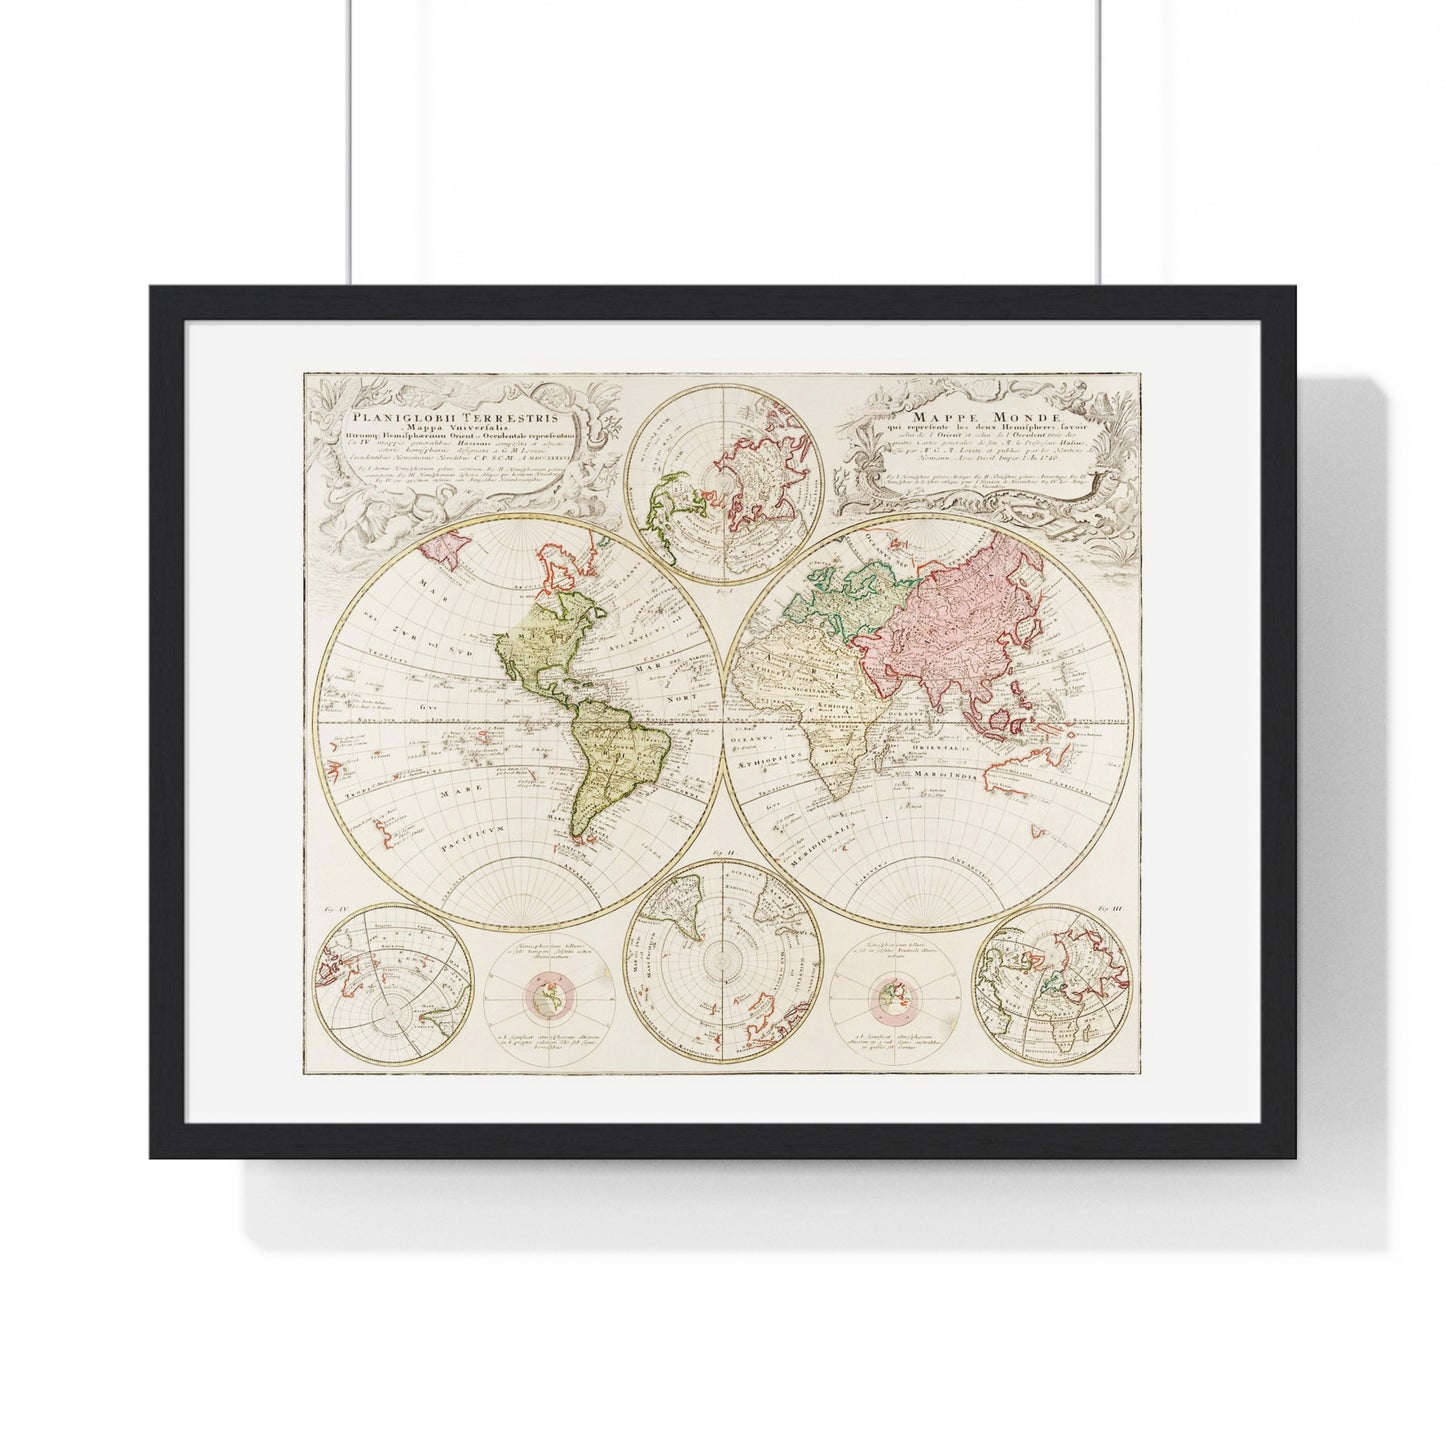 Antique Map of the World, Planiglobii Terrestris, Mappa Universalis (1746) by Johann Baptist, from the Original, Framed Print